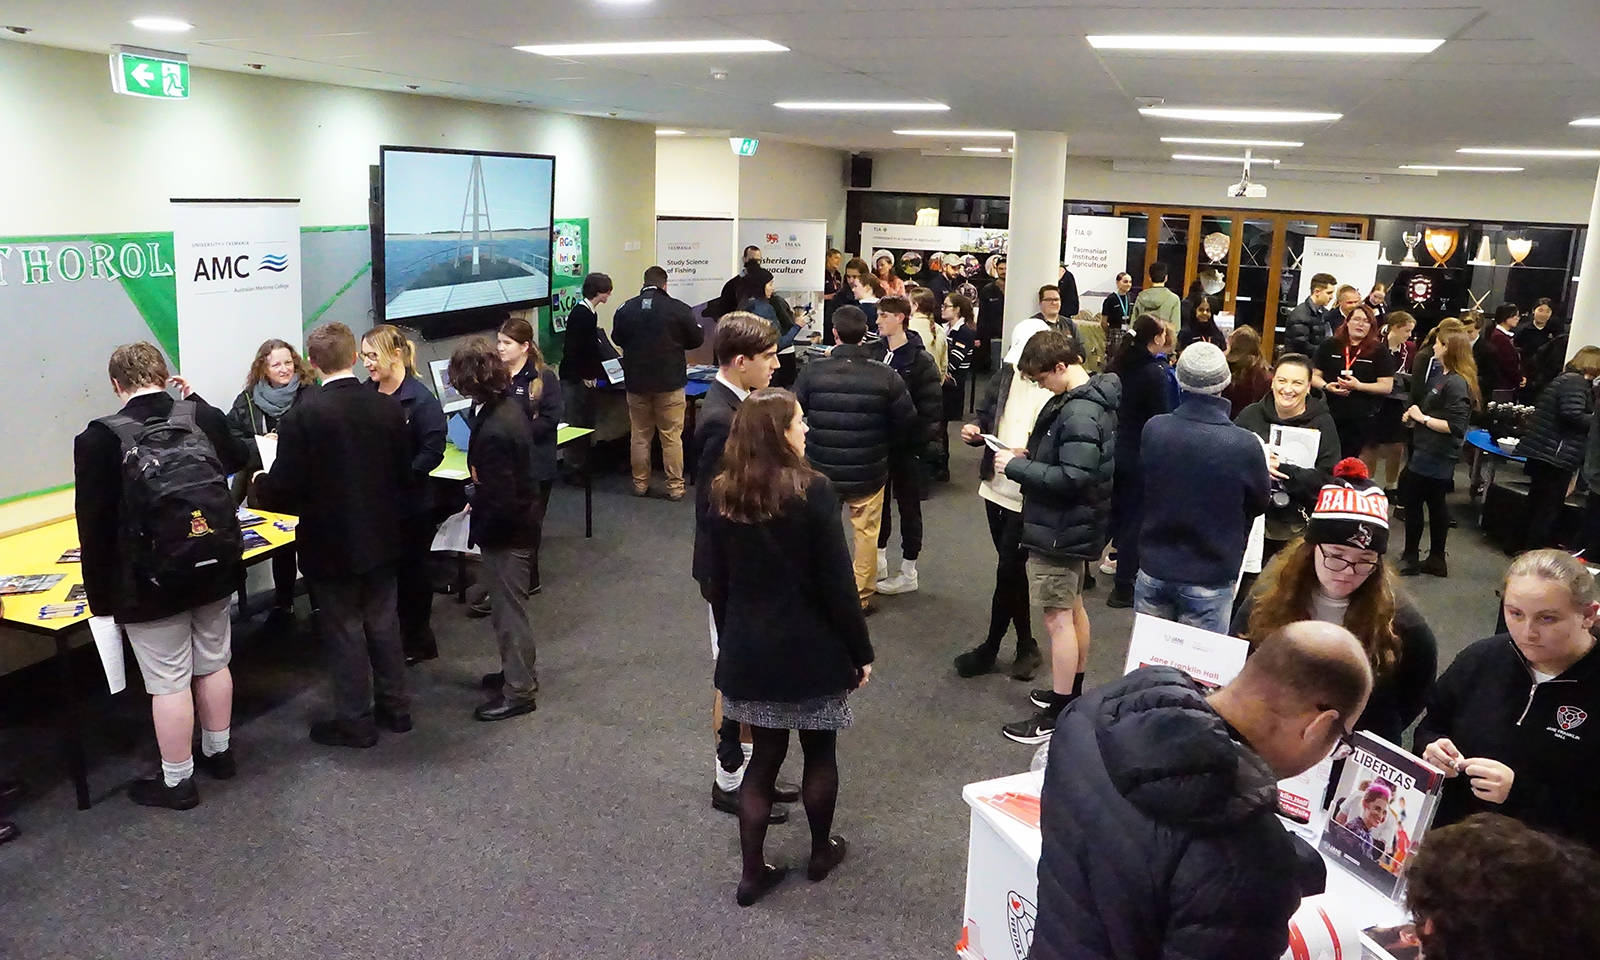 The Hutchins and St Michael’s Collegiate School Careers Expo